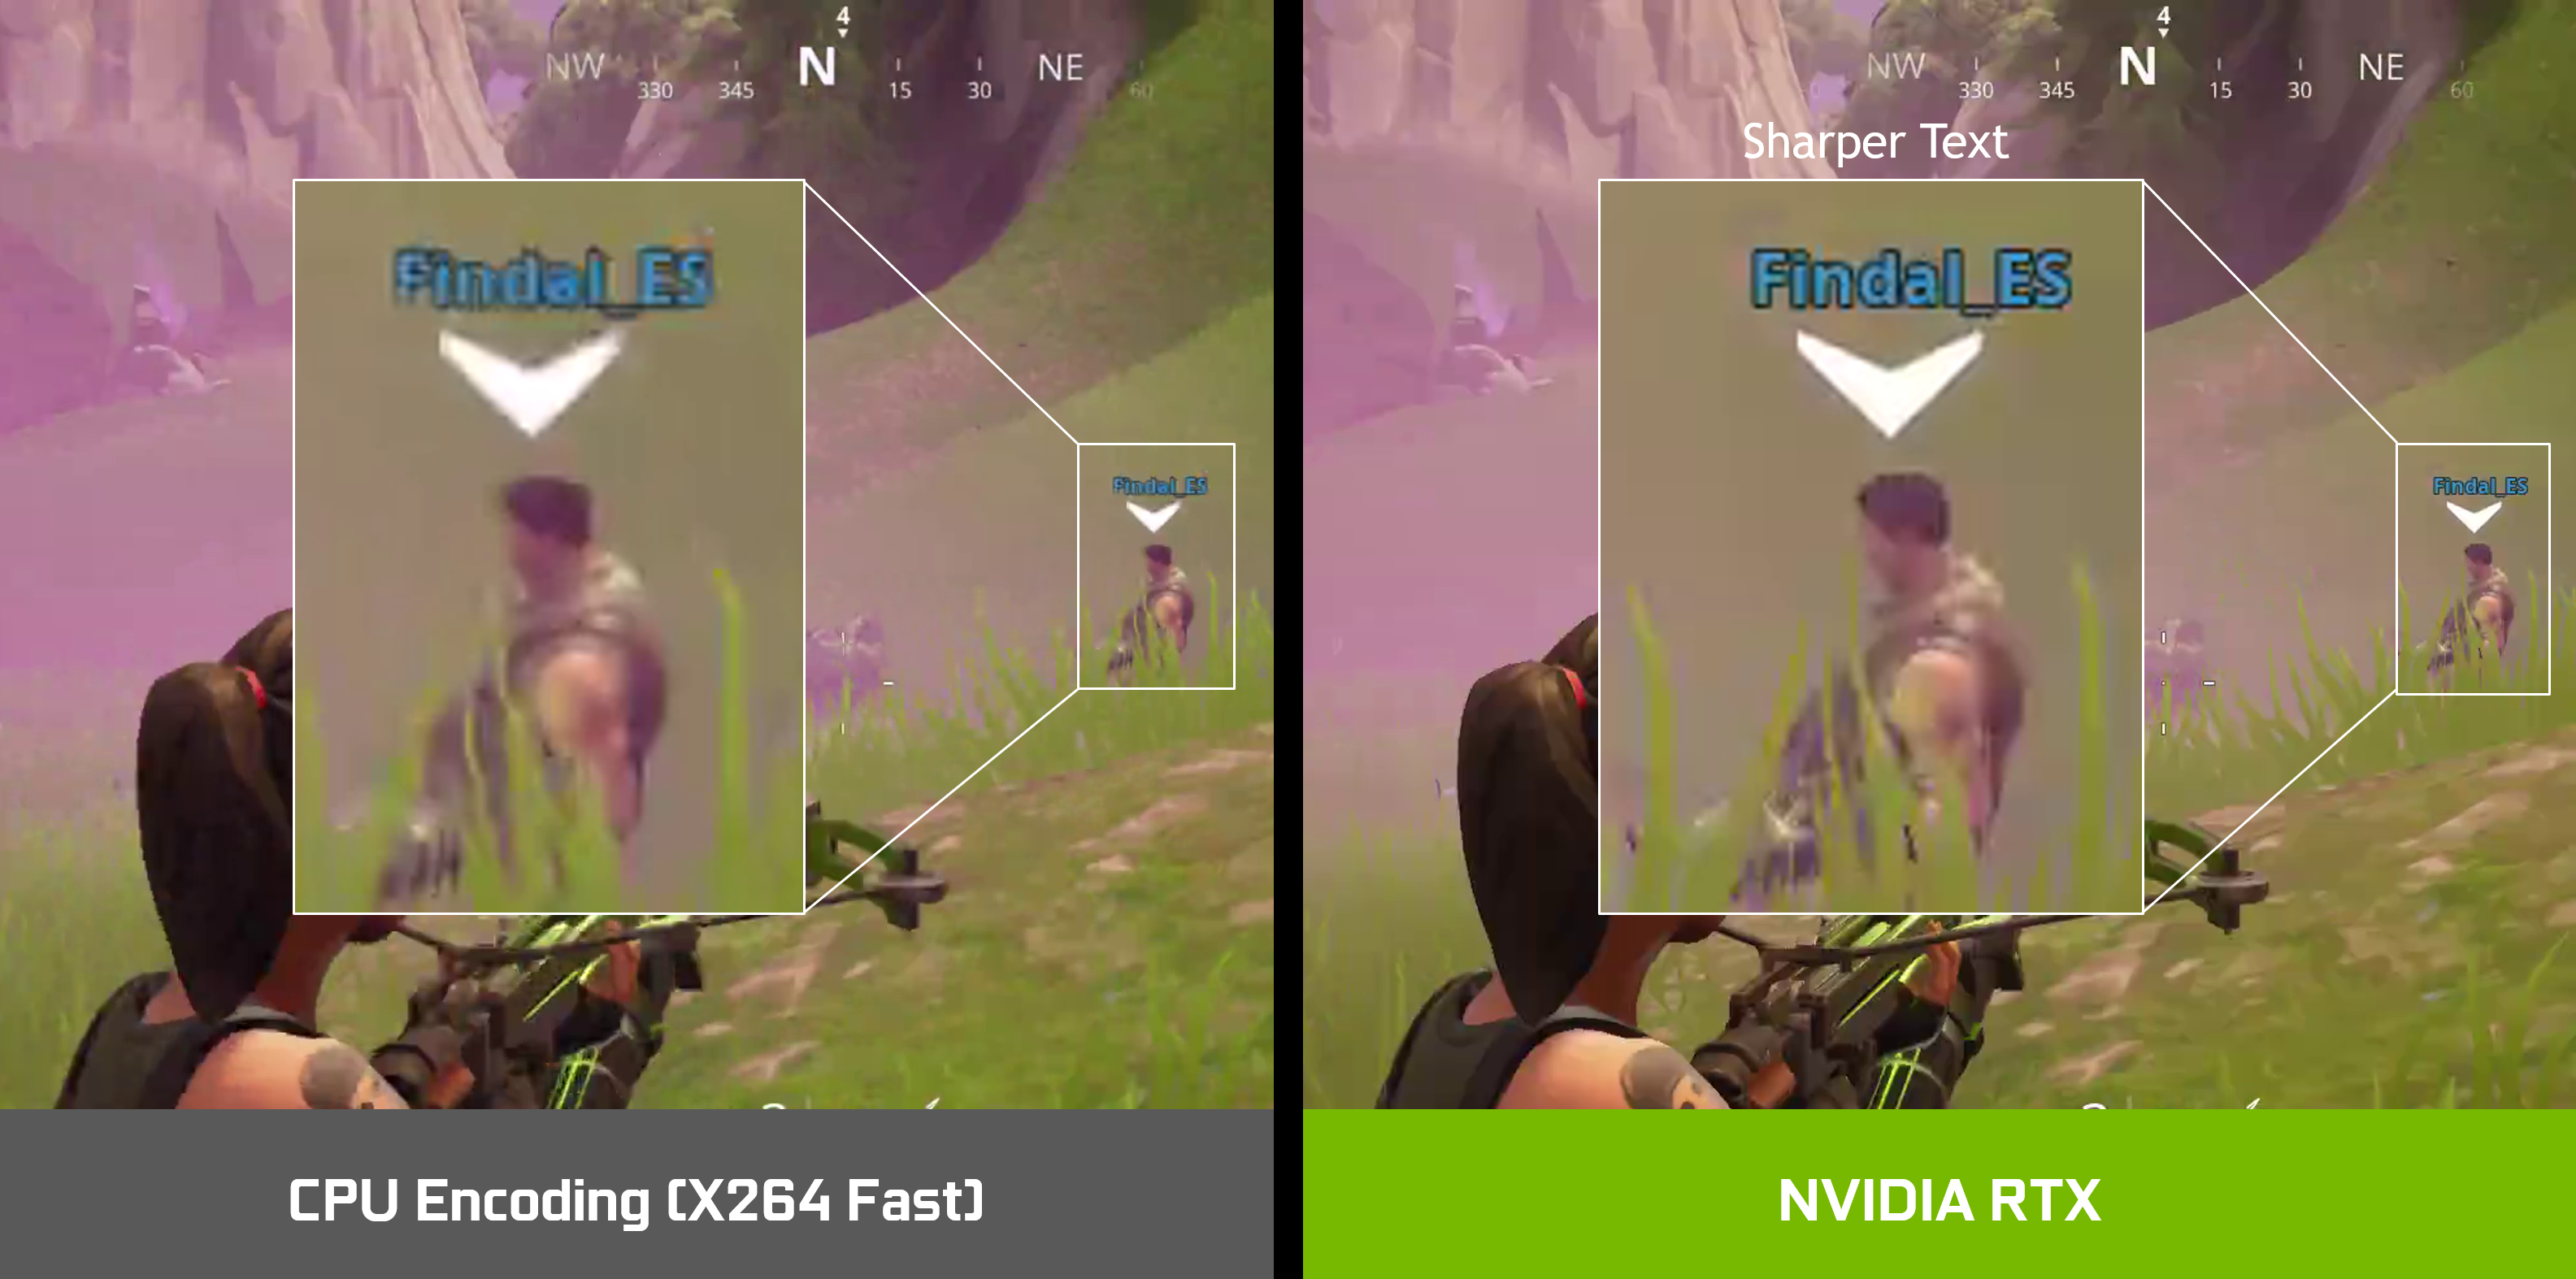 Available New GeForce-Optimized OBS and RTX Encoder Pro-Quality Broadcasting on a Single PC | GeForce | NVIDIA